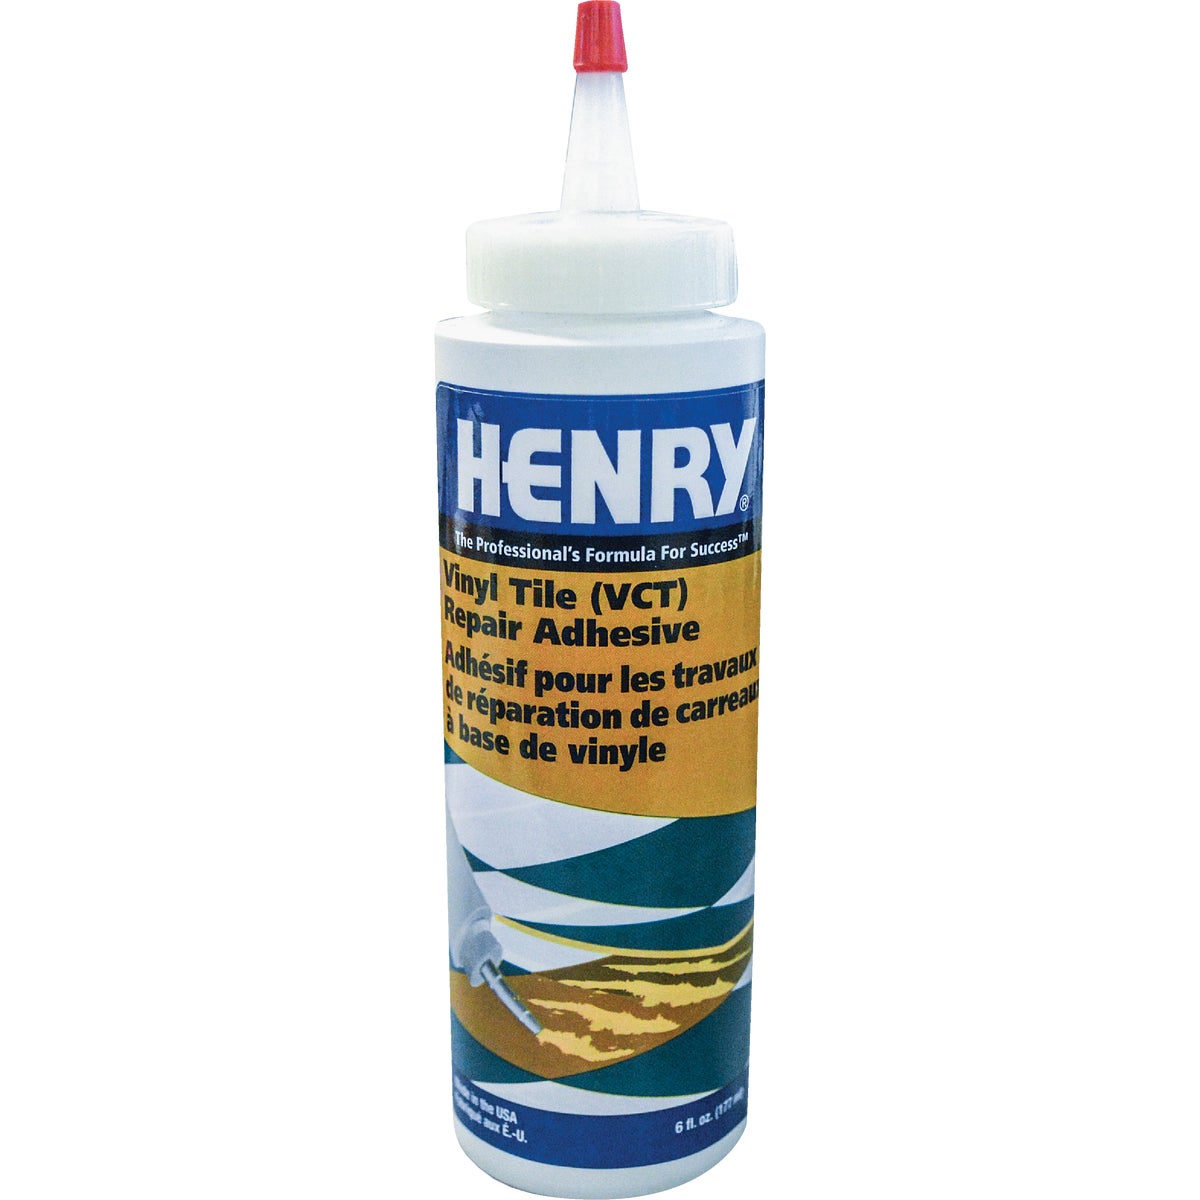 Item 278005, Designed for quick and easy repairs of vinyl composition tile (VCT).